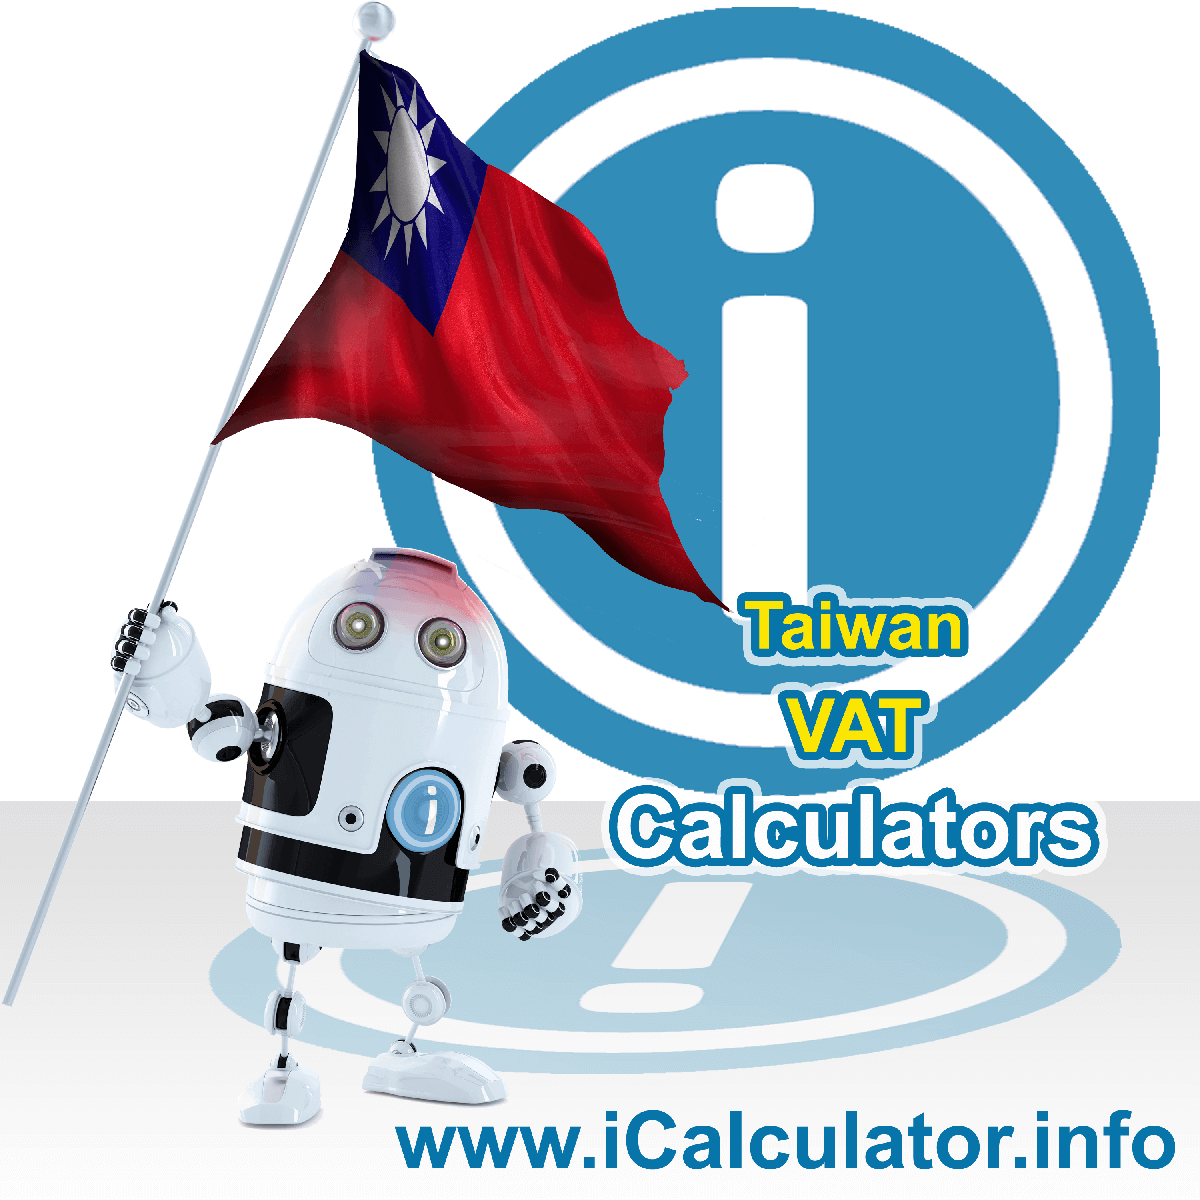 Taiwan VAT Calculator. This image shows the Taiwan flag and information relating to the VAT formula used for calculating Value Added Tax in Taiwan using the Taiwan VAT Calculator in 2024